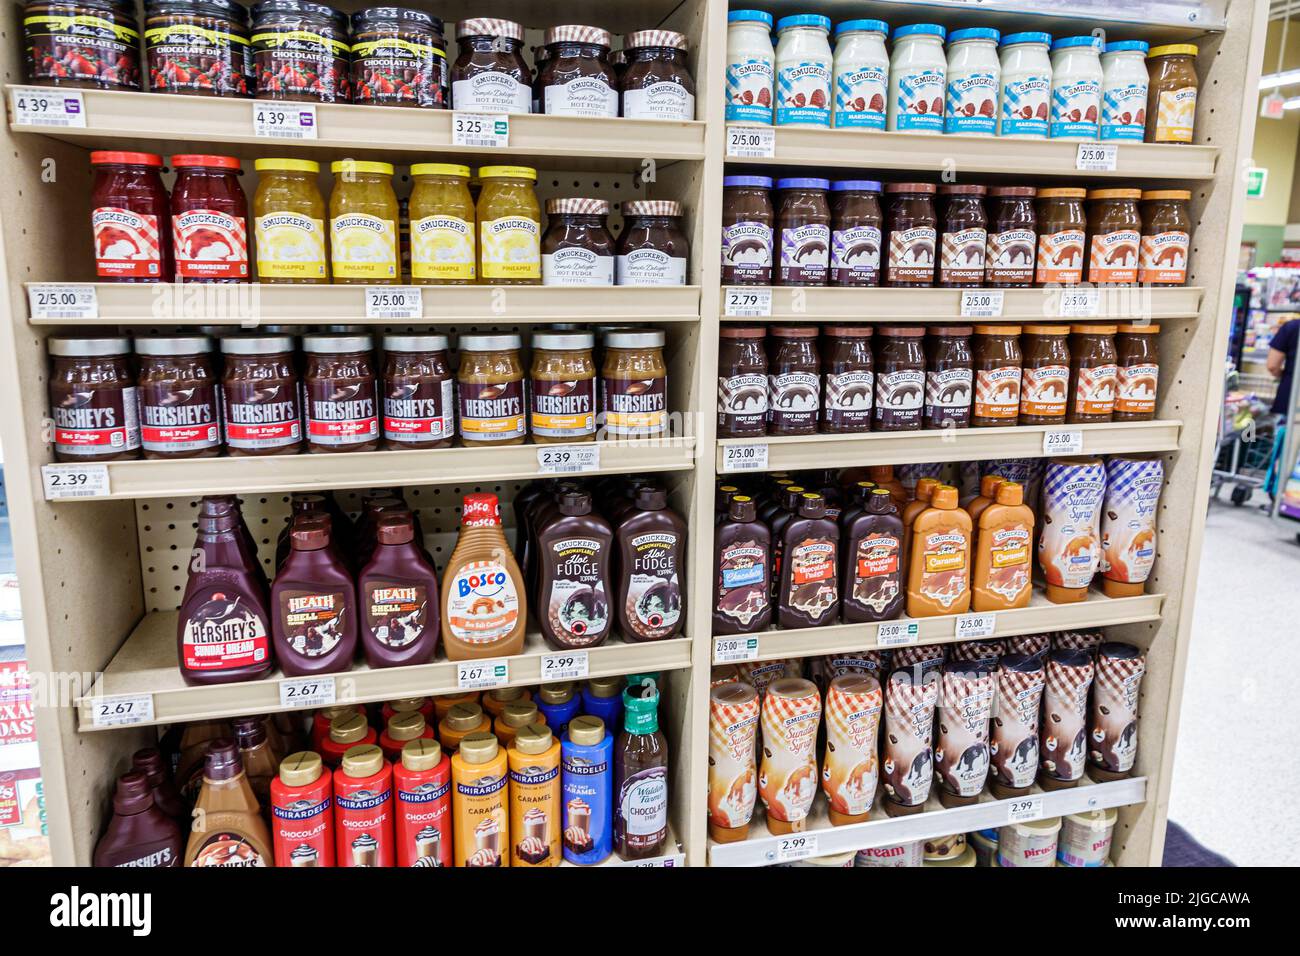 Miami Beach Florida,Publix grocery store supermarket groceries food inside interior,display sale shelf shelves chocolate syrup Hershey's Smucker's Stock Photo